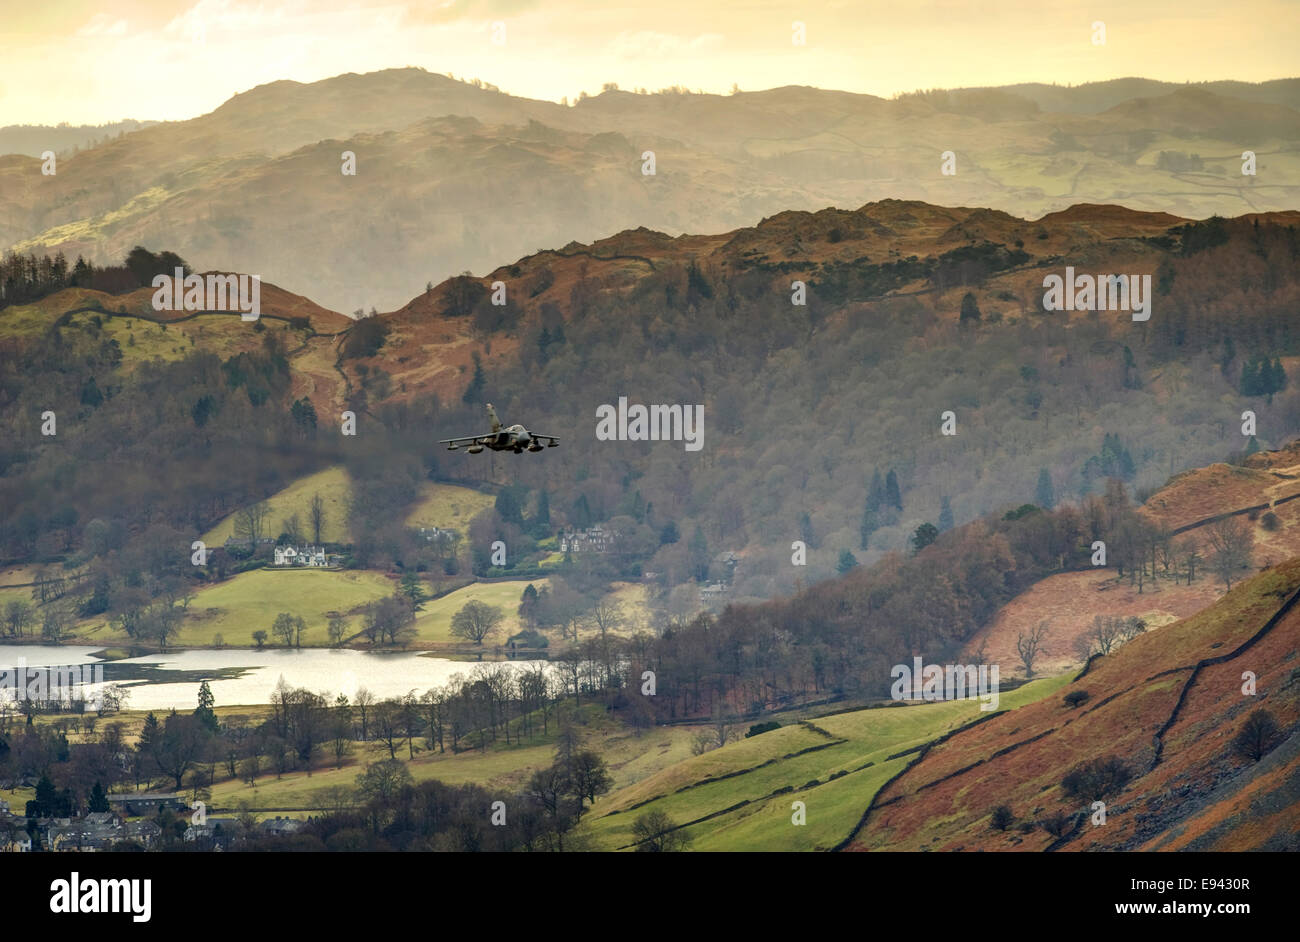 RAF Tornado fighter / bomber on low level training exercise over Grasmere, English Lake District, UK. Stock Photo